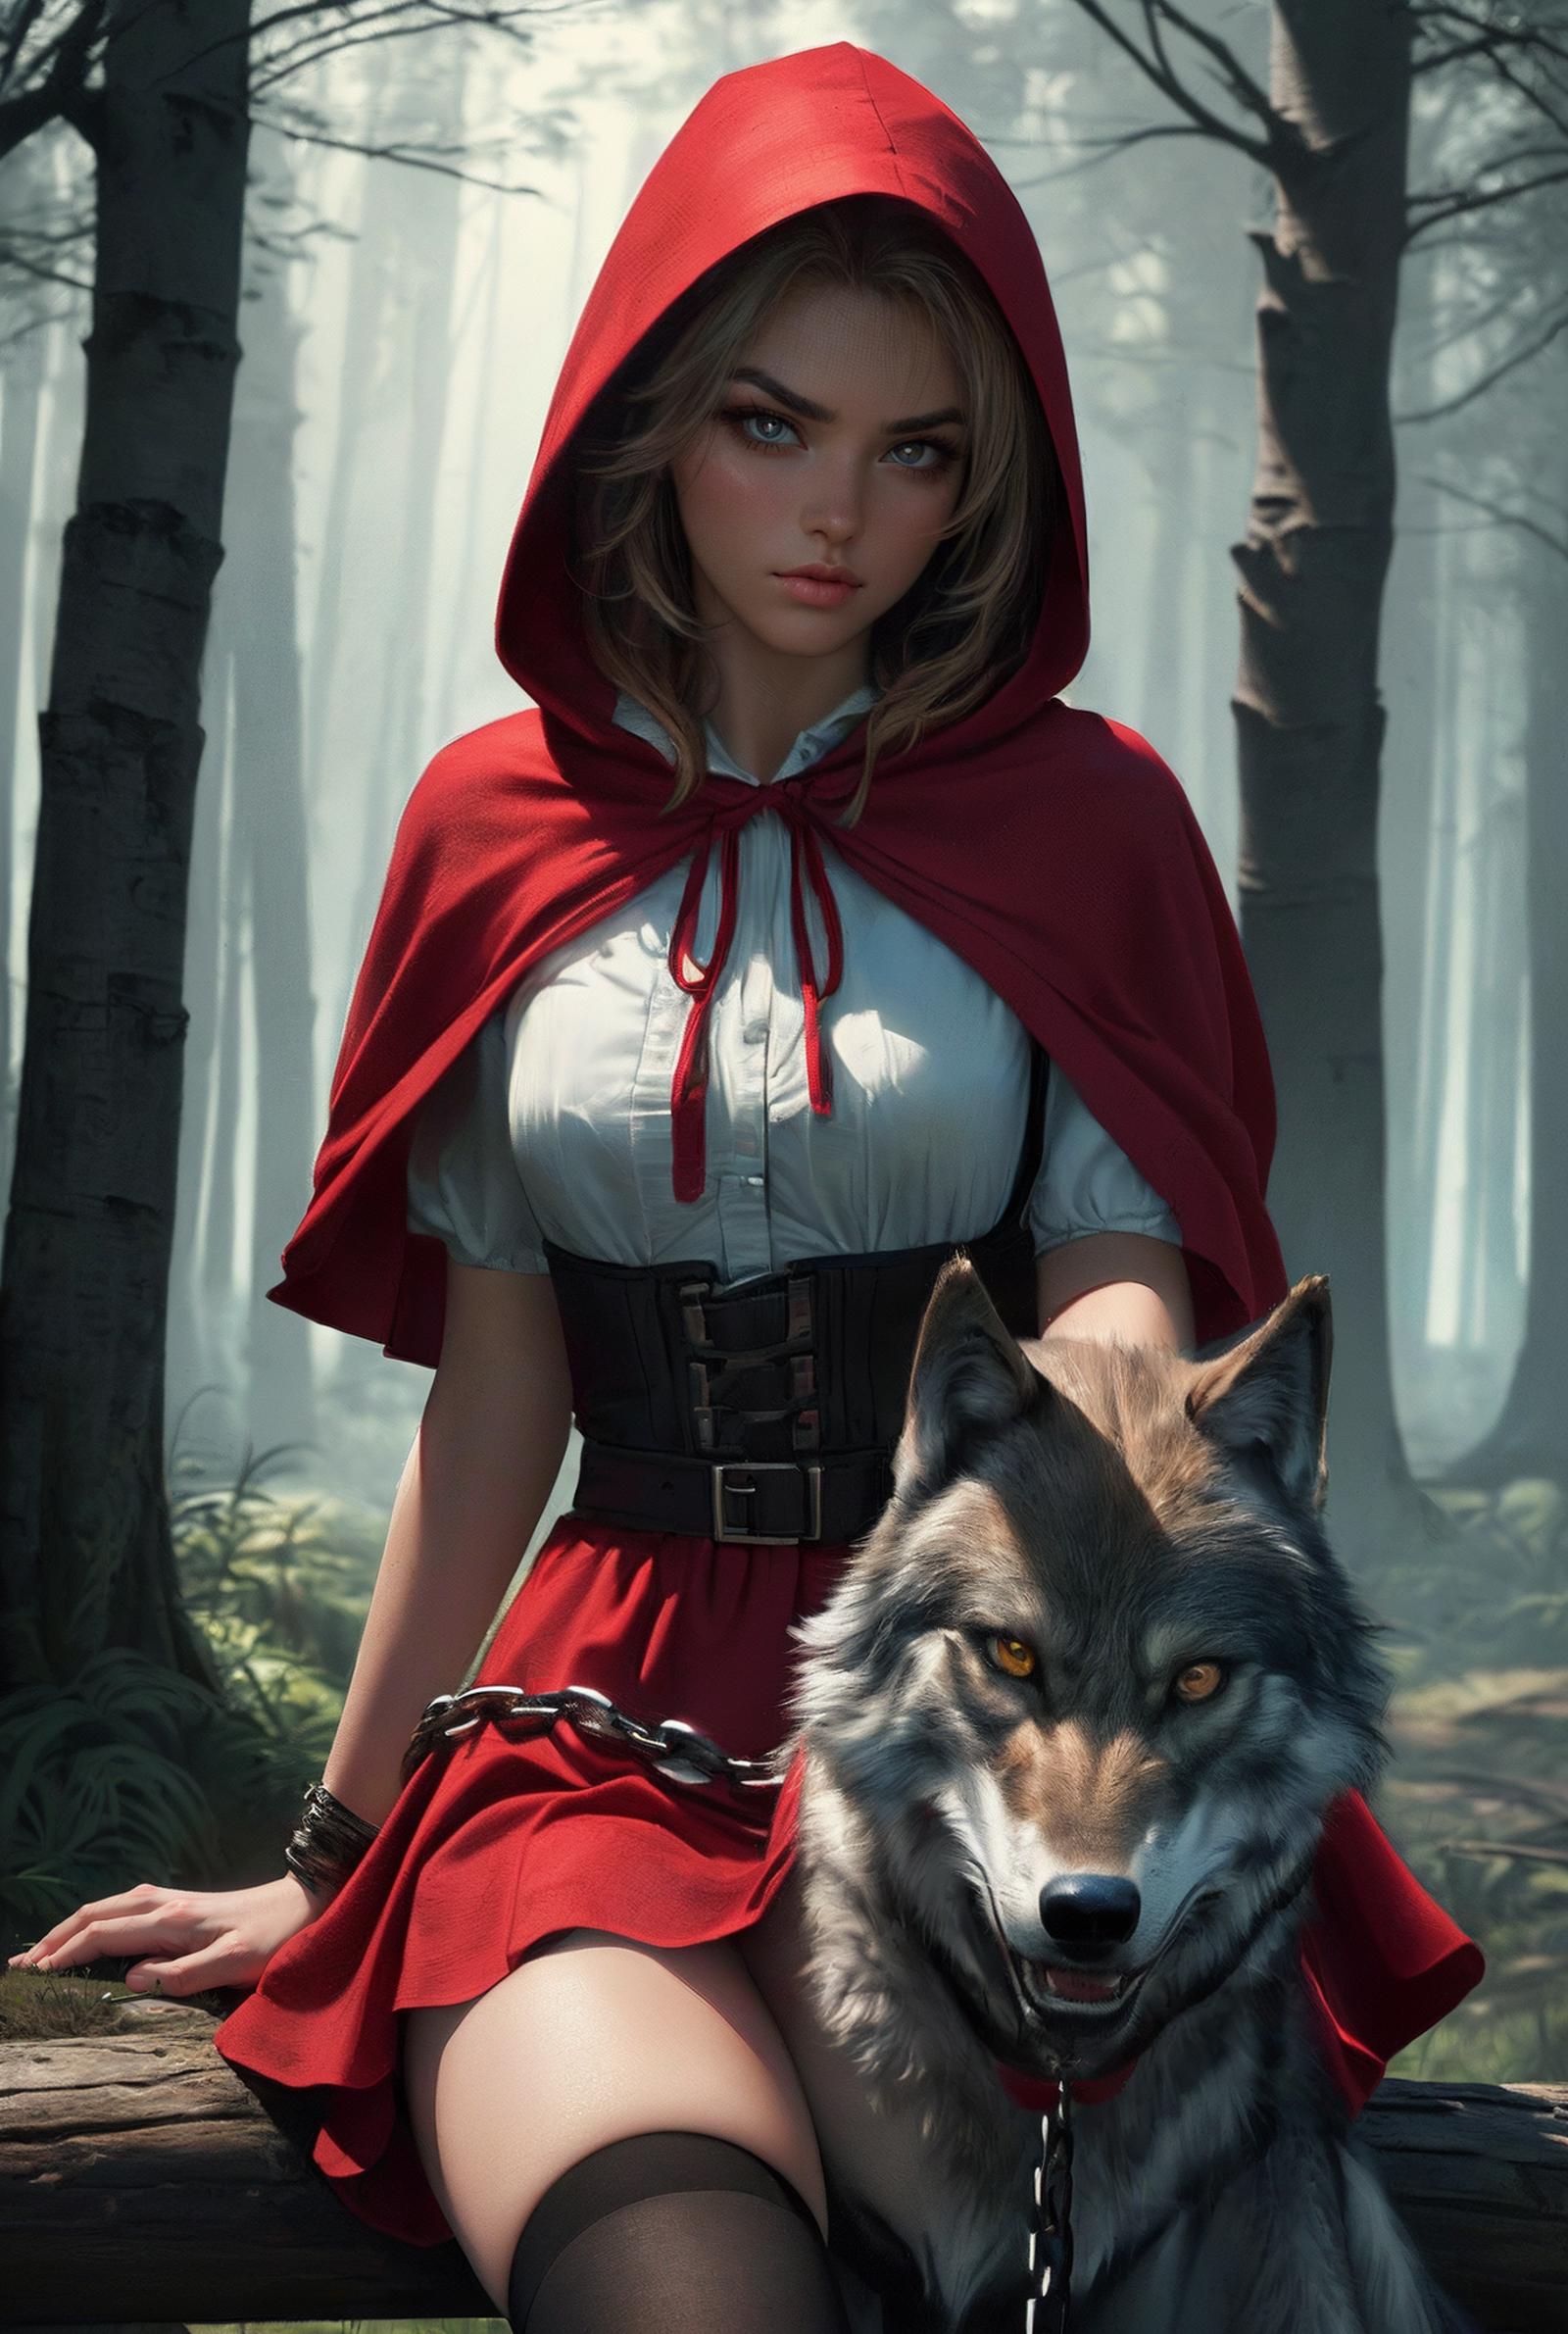 Little red riding hood image by Artificial_Lion